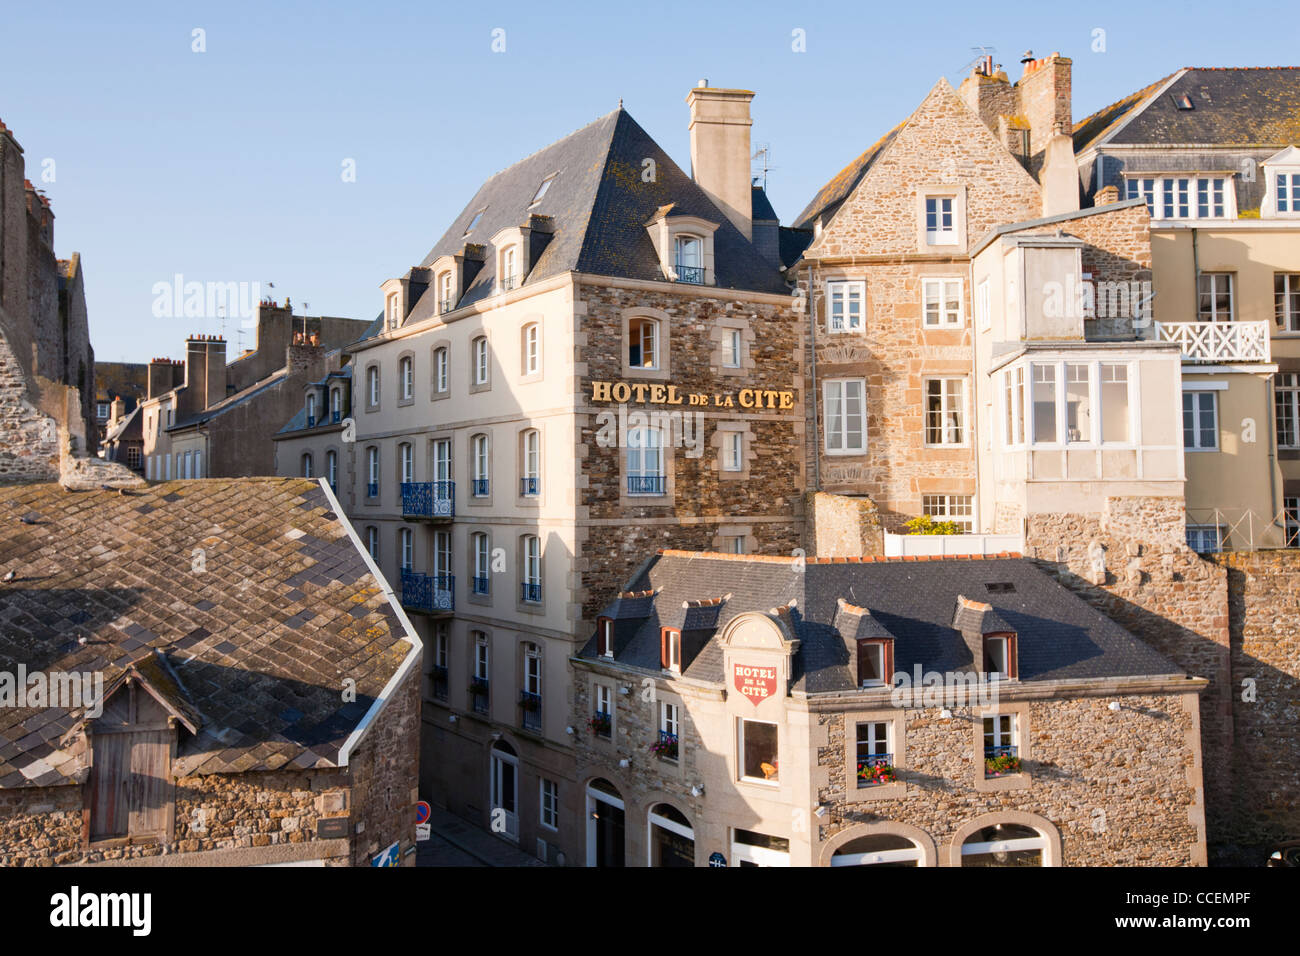 Some of the old buildings of St Malo, Brittany, France, from the city ramparts. Stock Photo